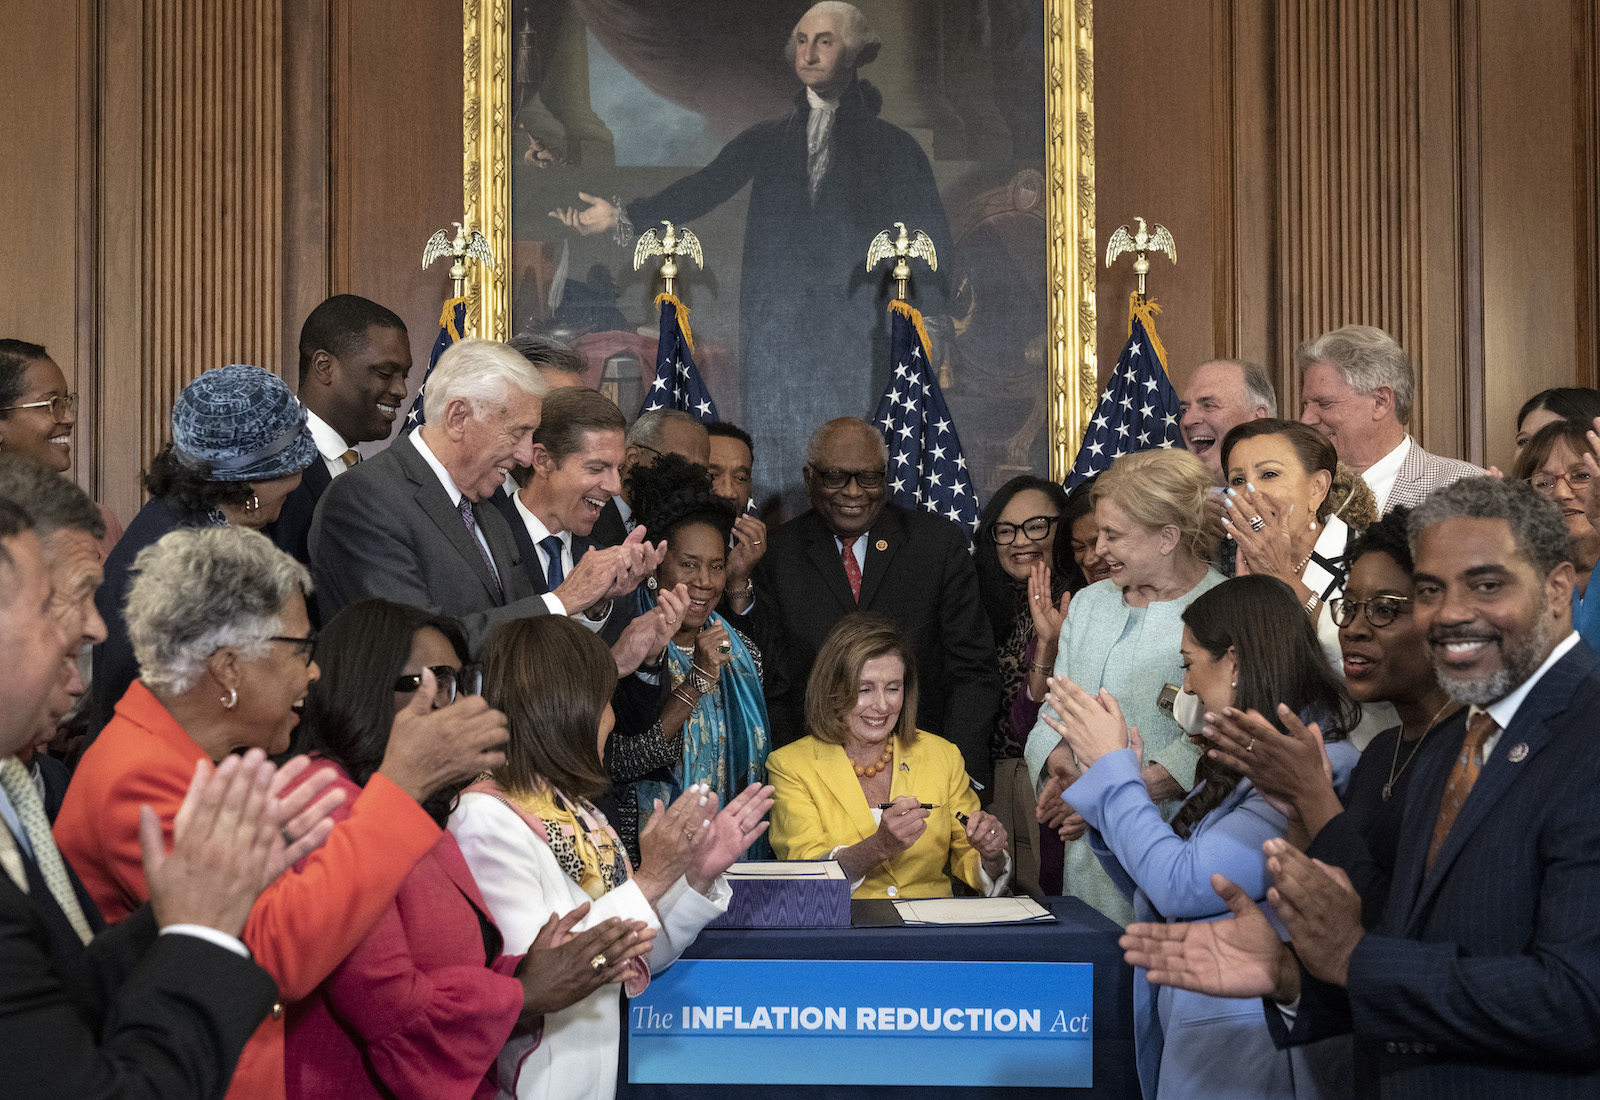 Nancy Pelosi seated in front of a portrait of George Washington, surrounded by lawmakers